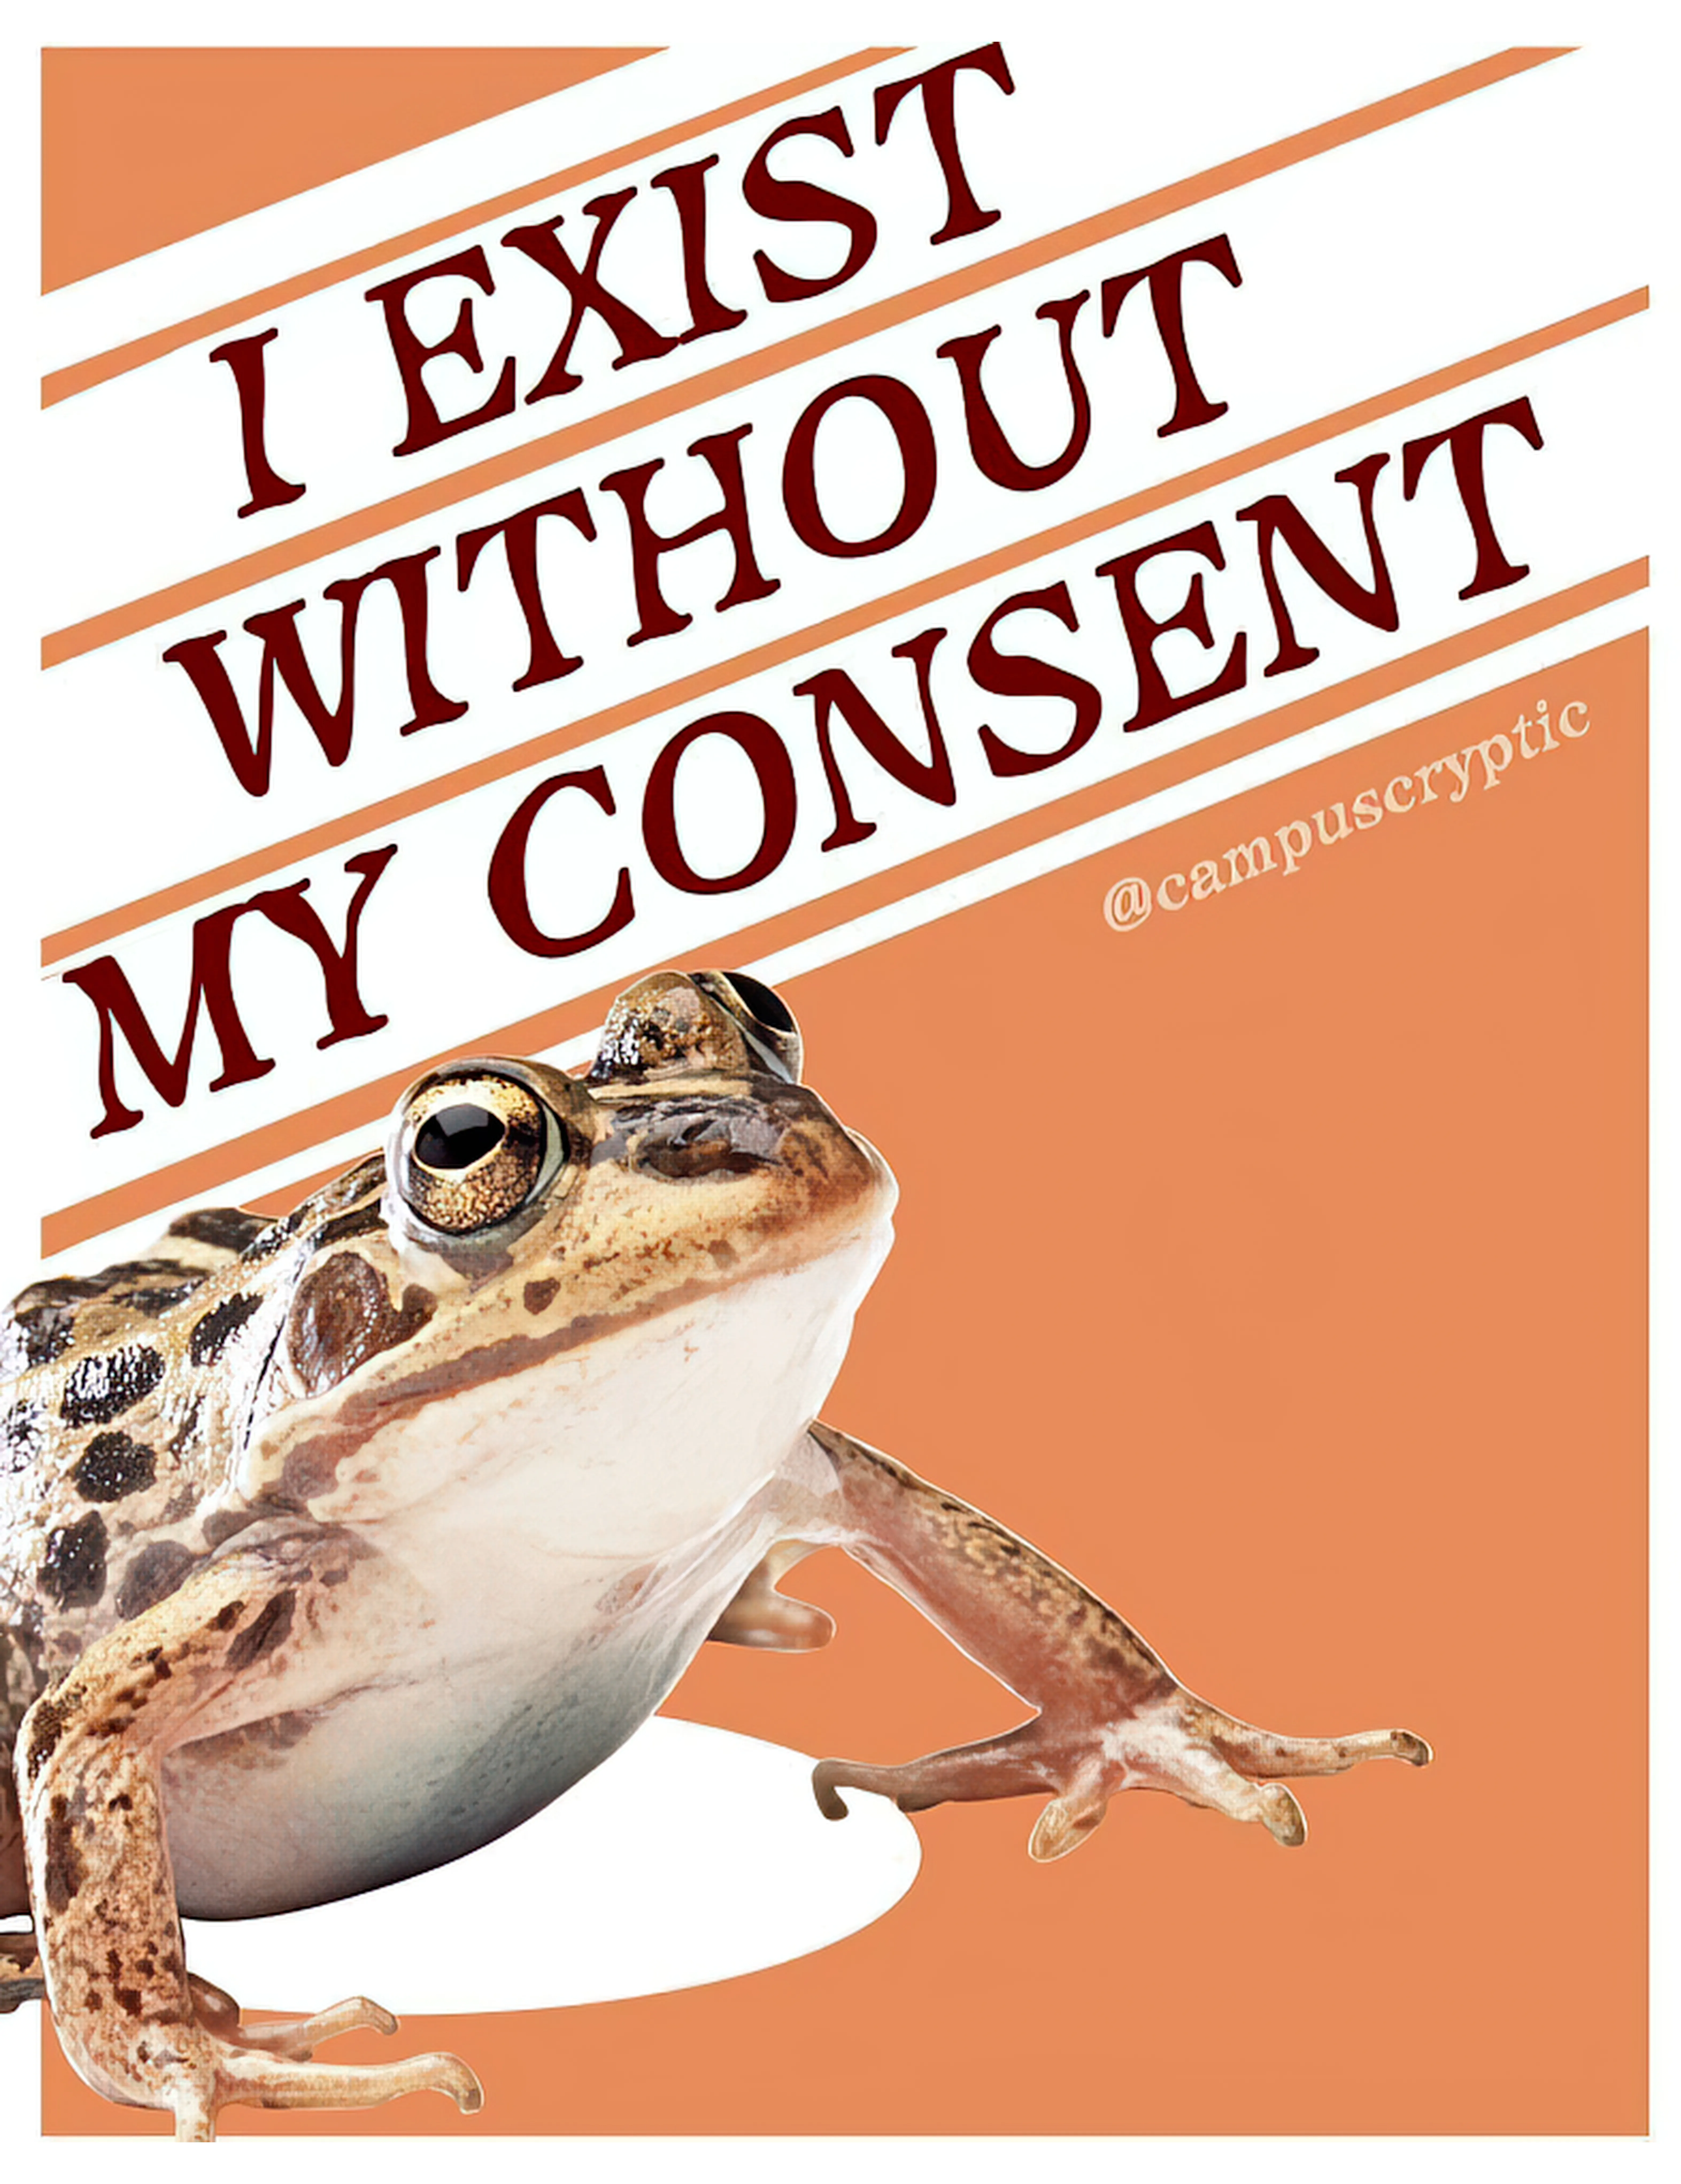 I Exist Without My Consent